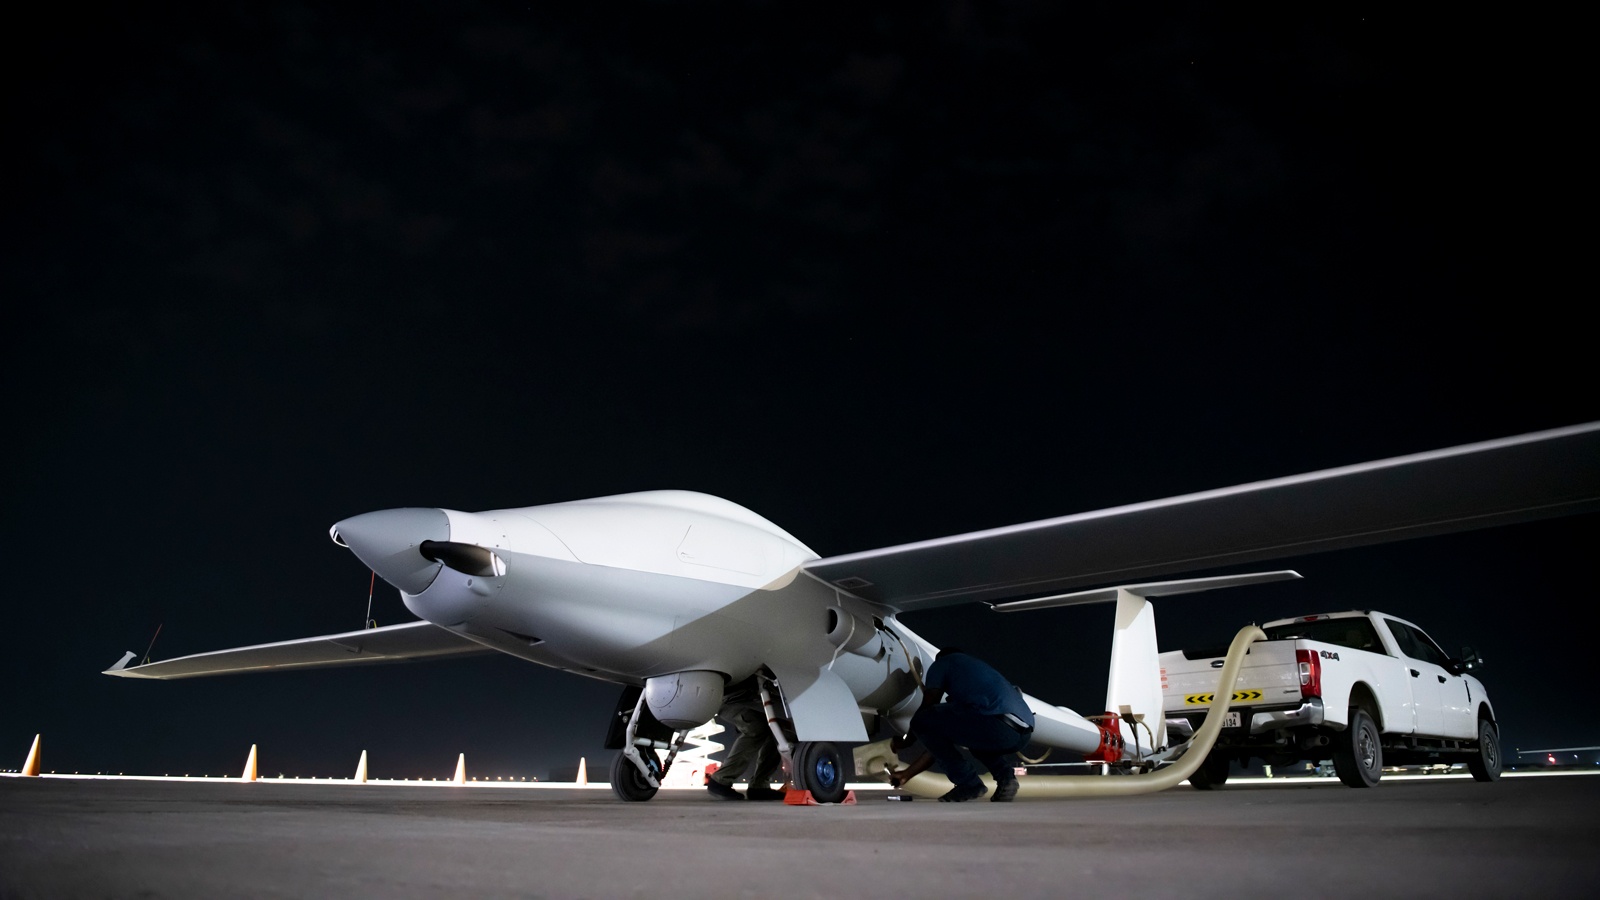 US Air Force unveils drone that can fly for 80 hours continuously